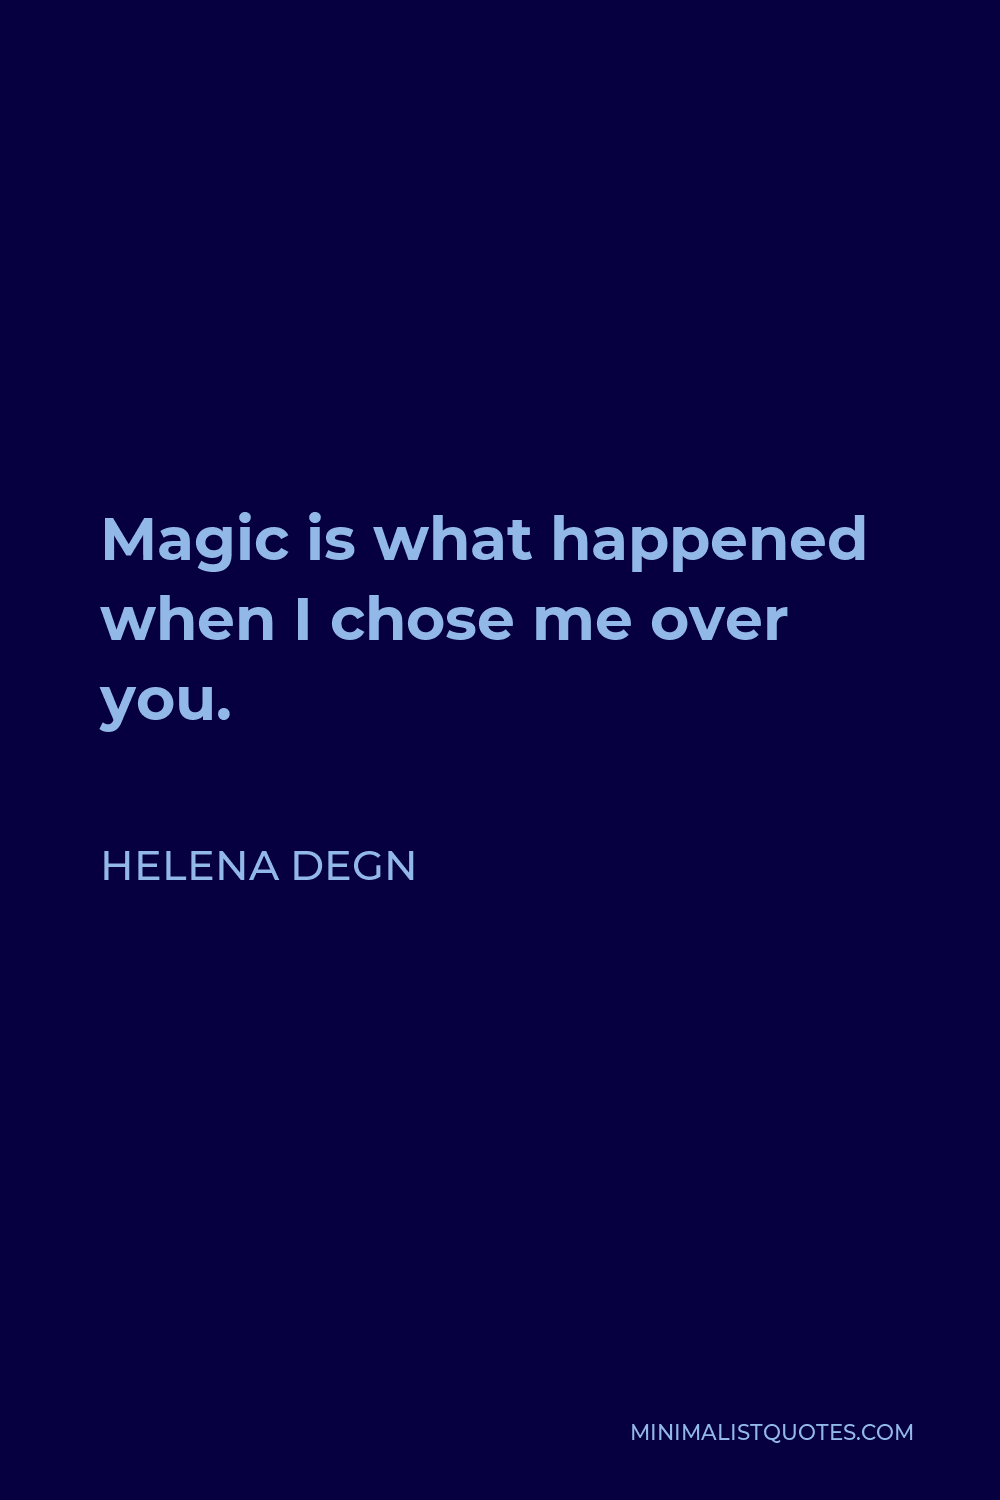 Helena Degn Quote - Magic is what happened when I chose me over you.